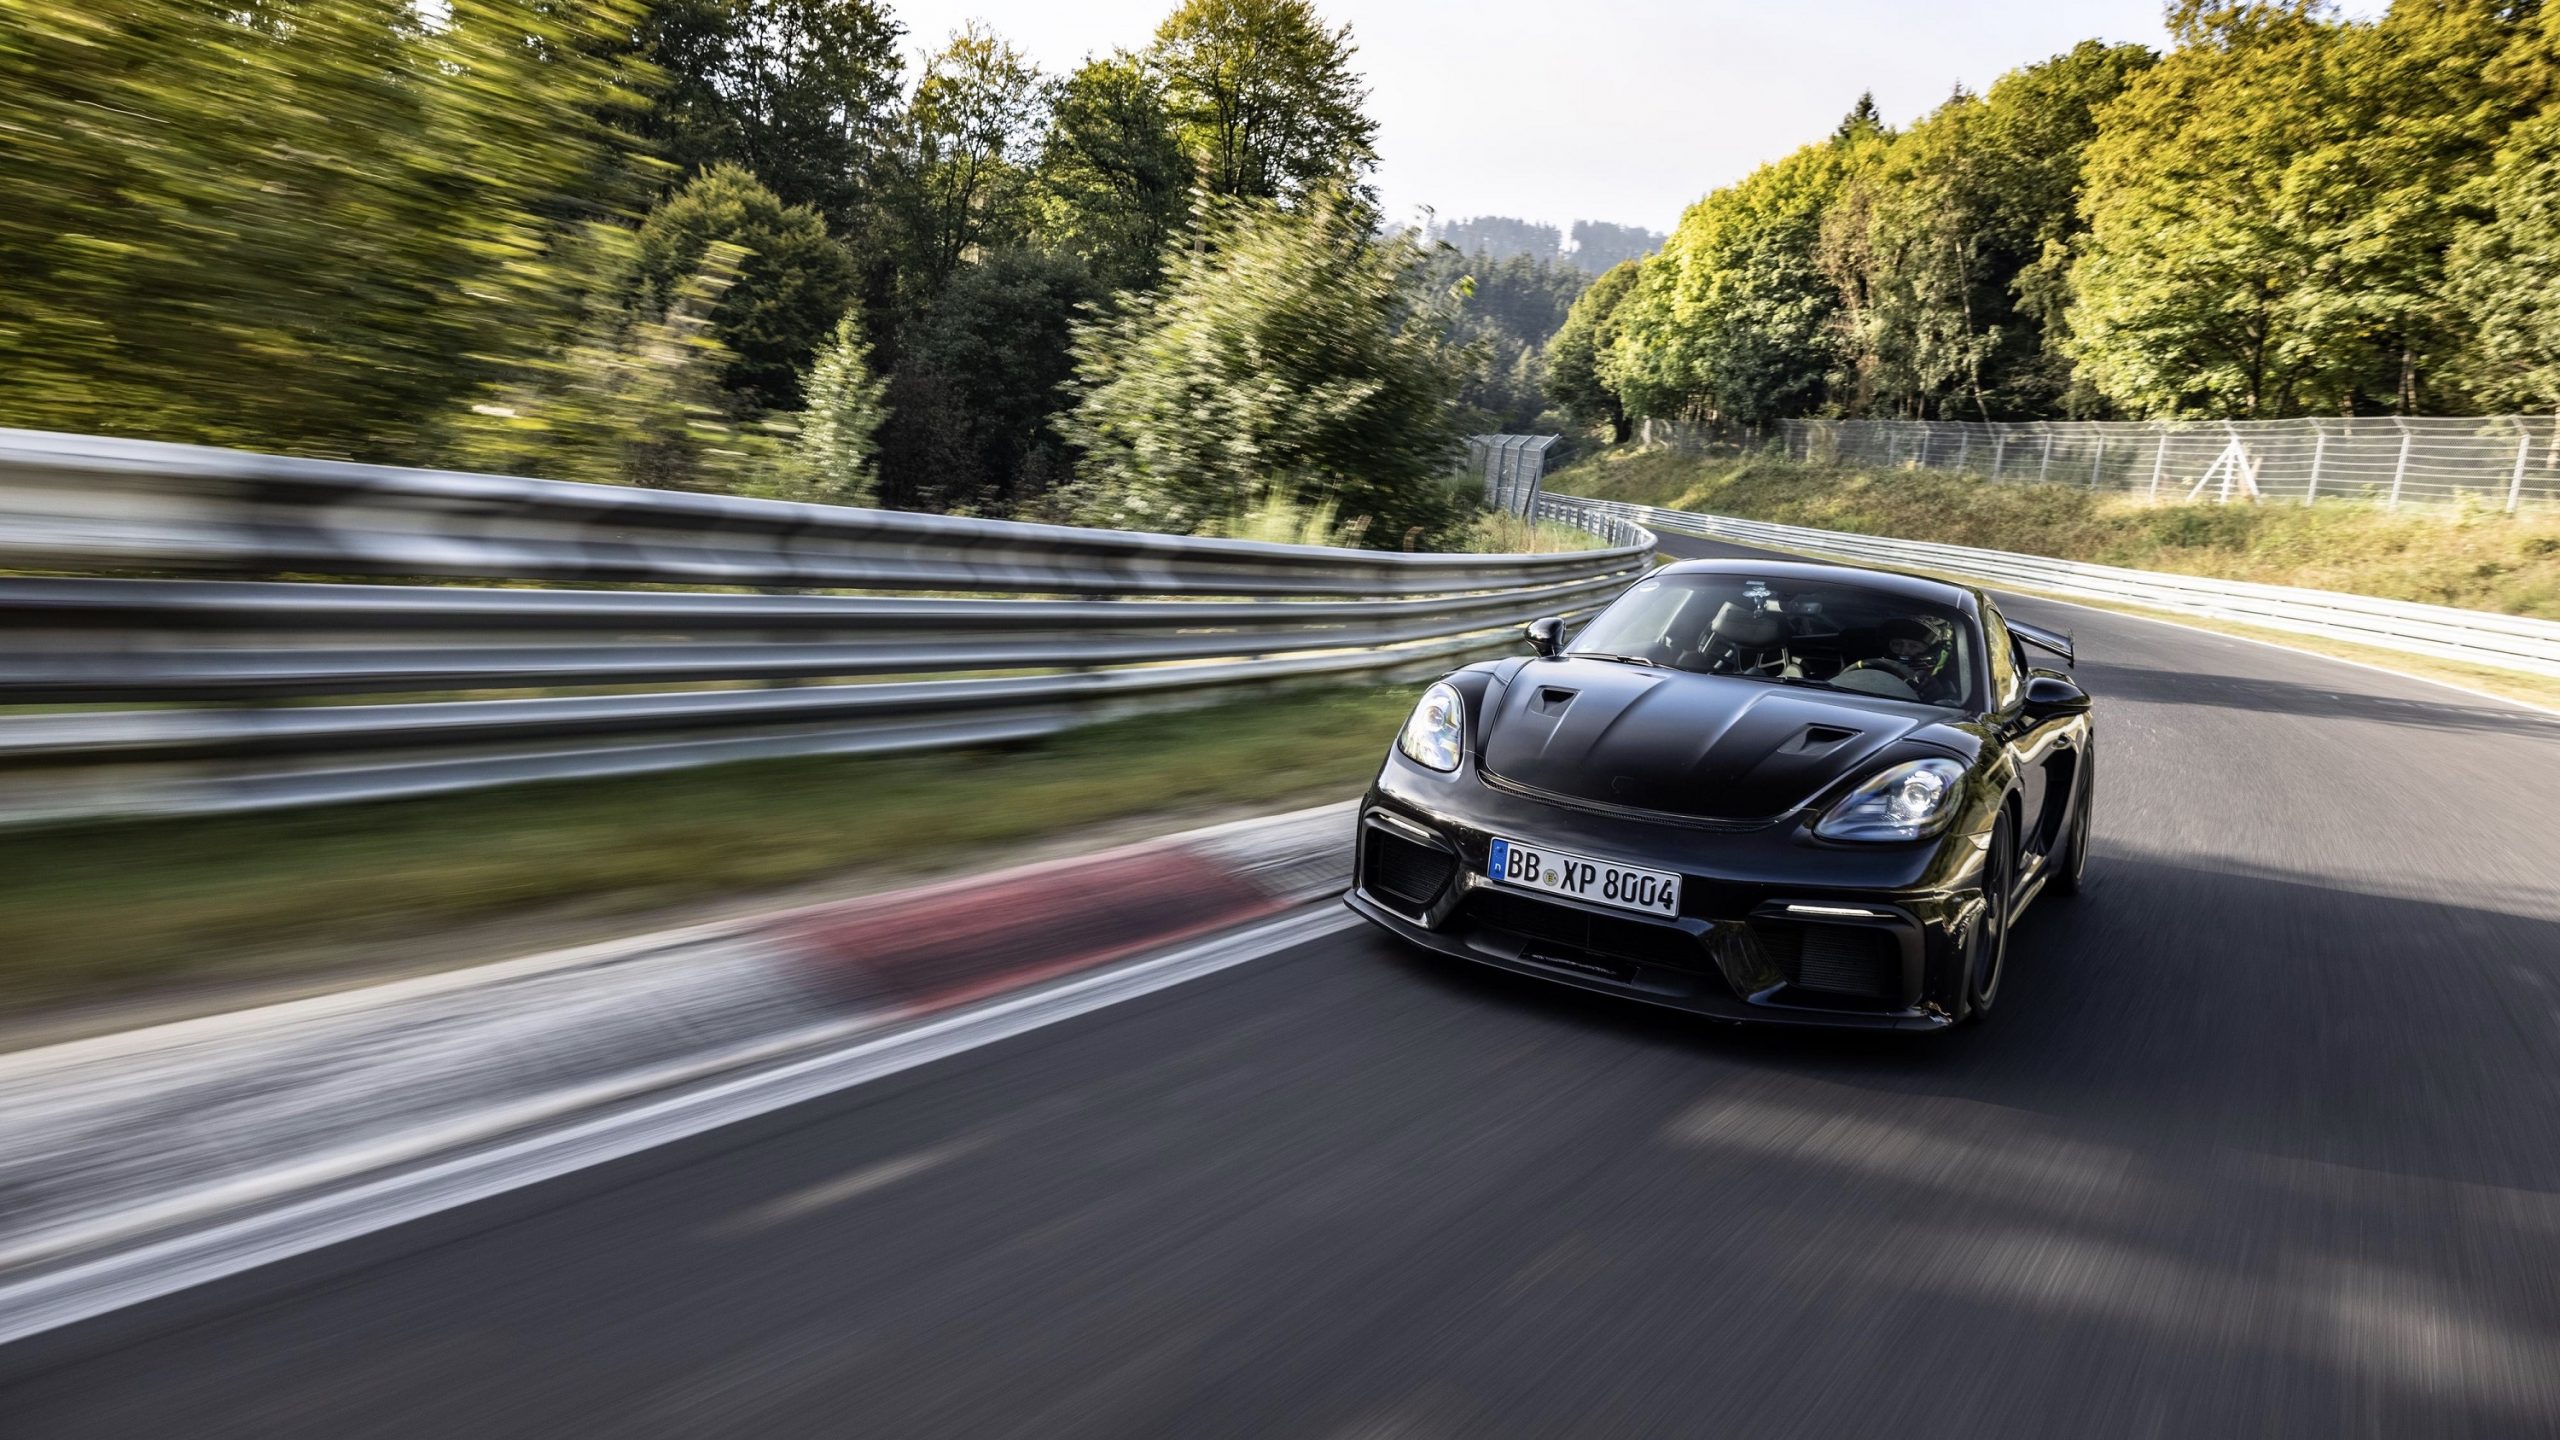 A black Porsche Cayman GT4 RS at the Nurburgring, shot from the front 3/4